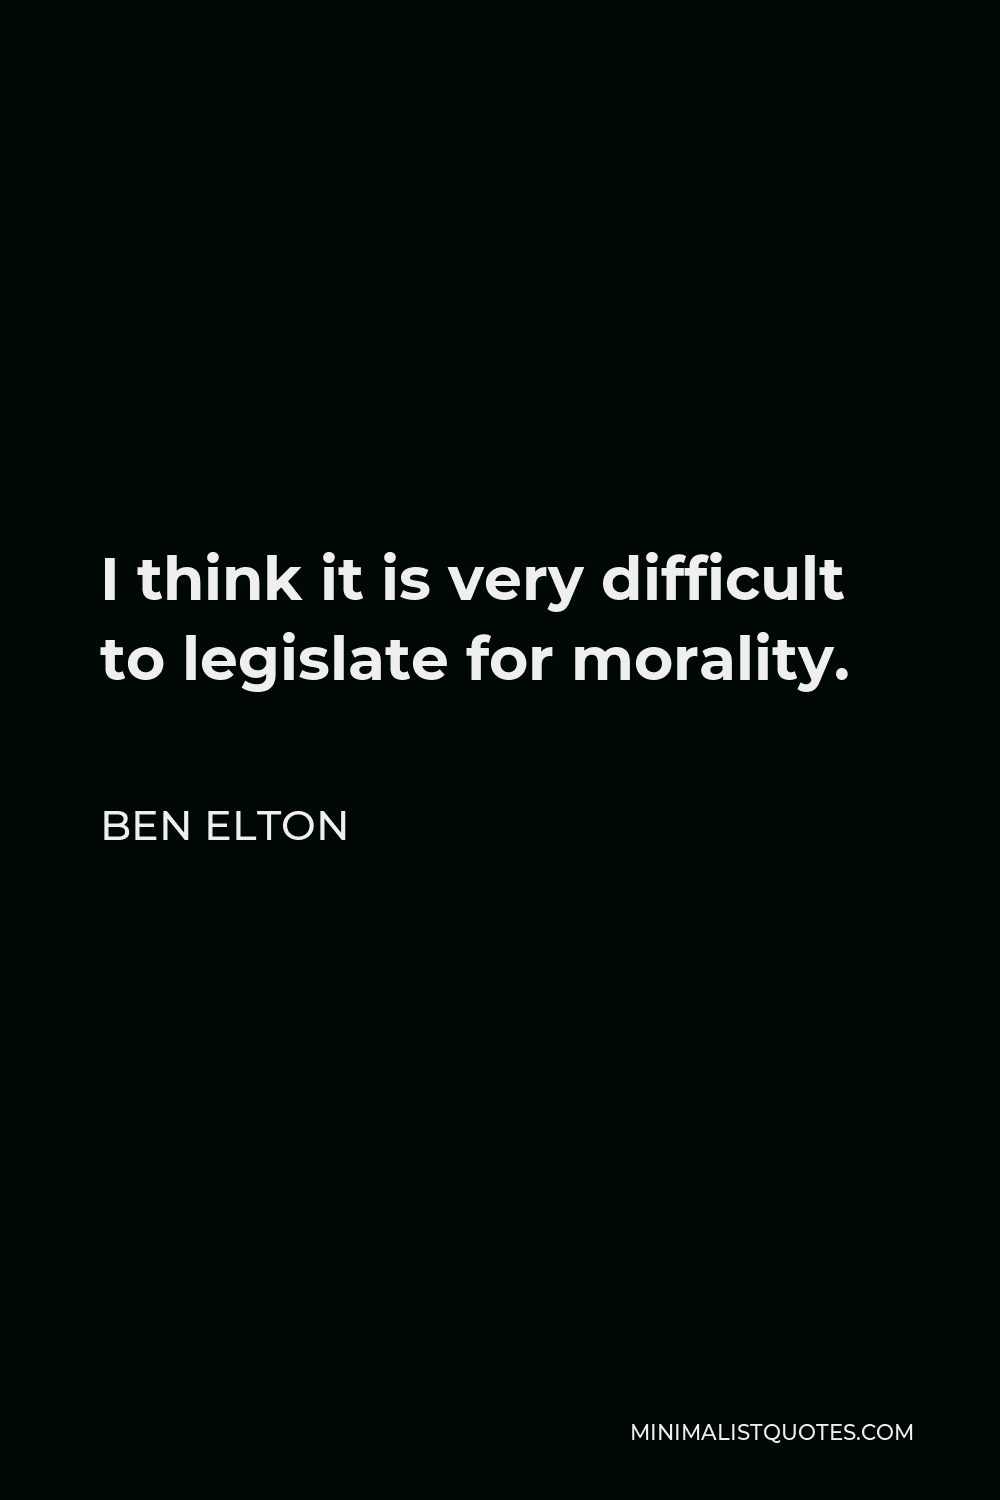 Ben Elton Quote - I think it is very difficult to legislate for morality.